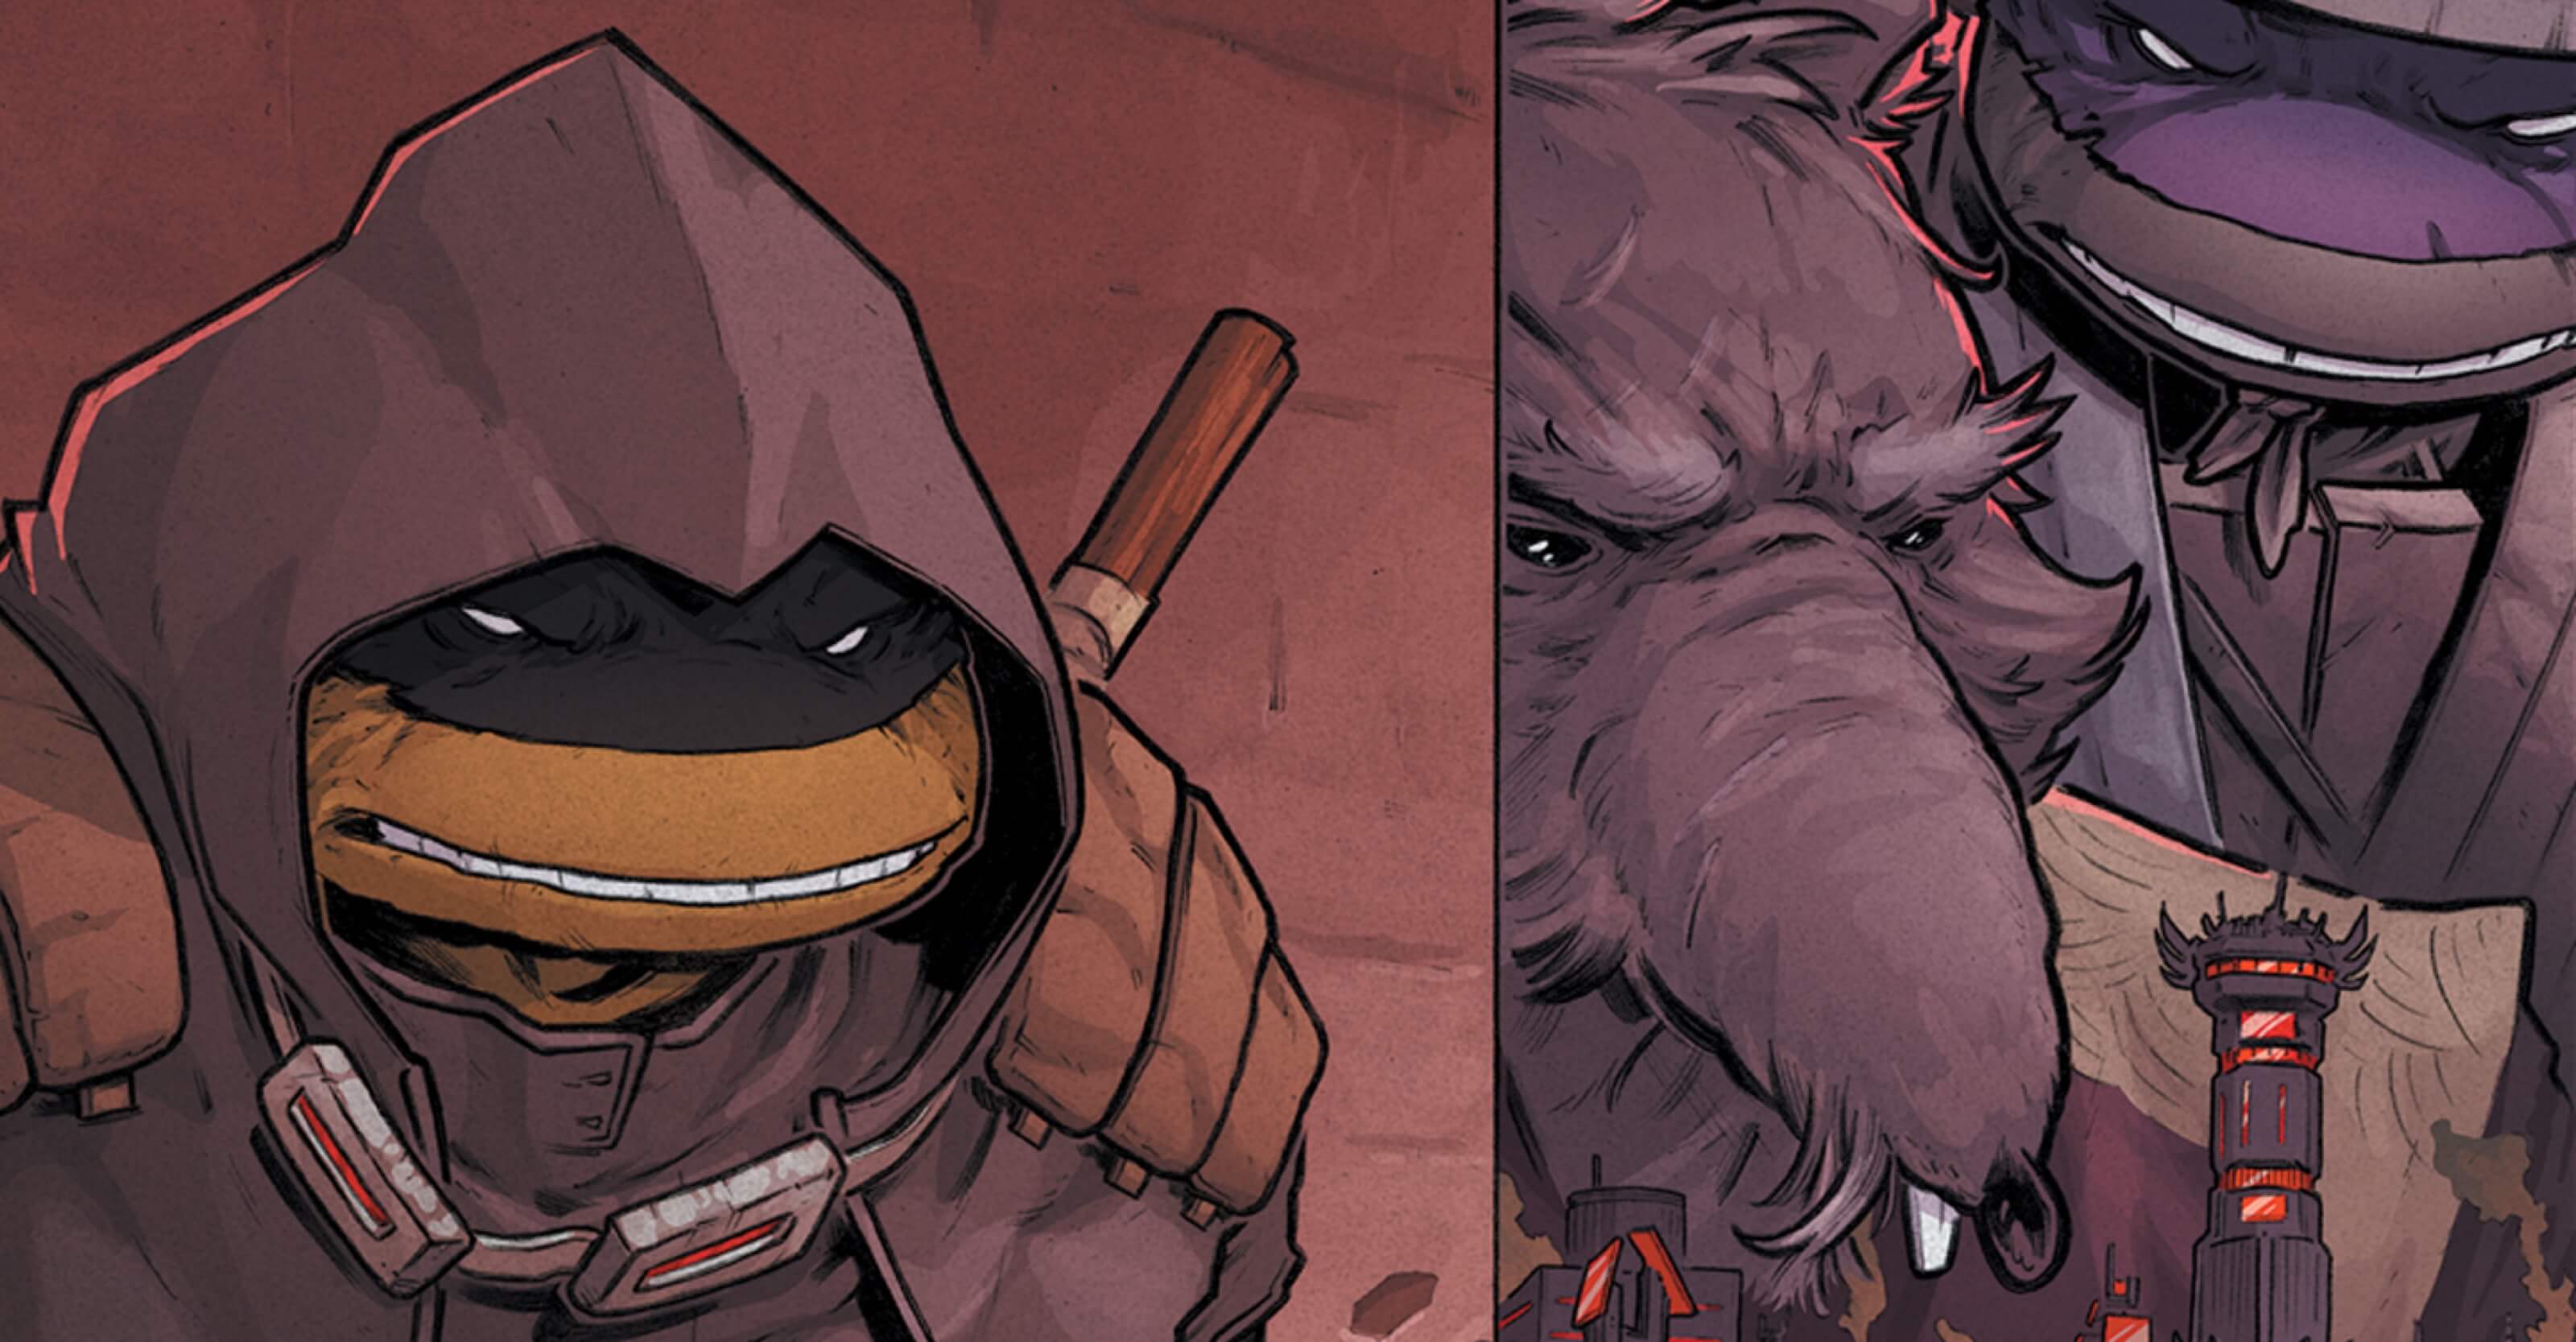 Teenage Mutant Ninja Turtles: The Last Ronin—The Covers Hardcover Announced for Release in June